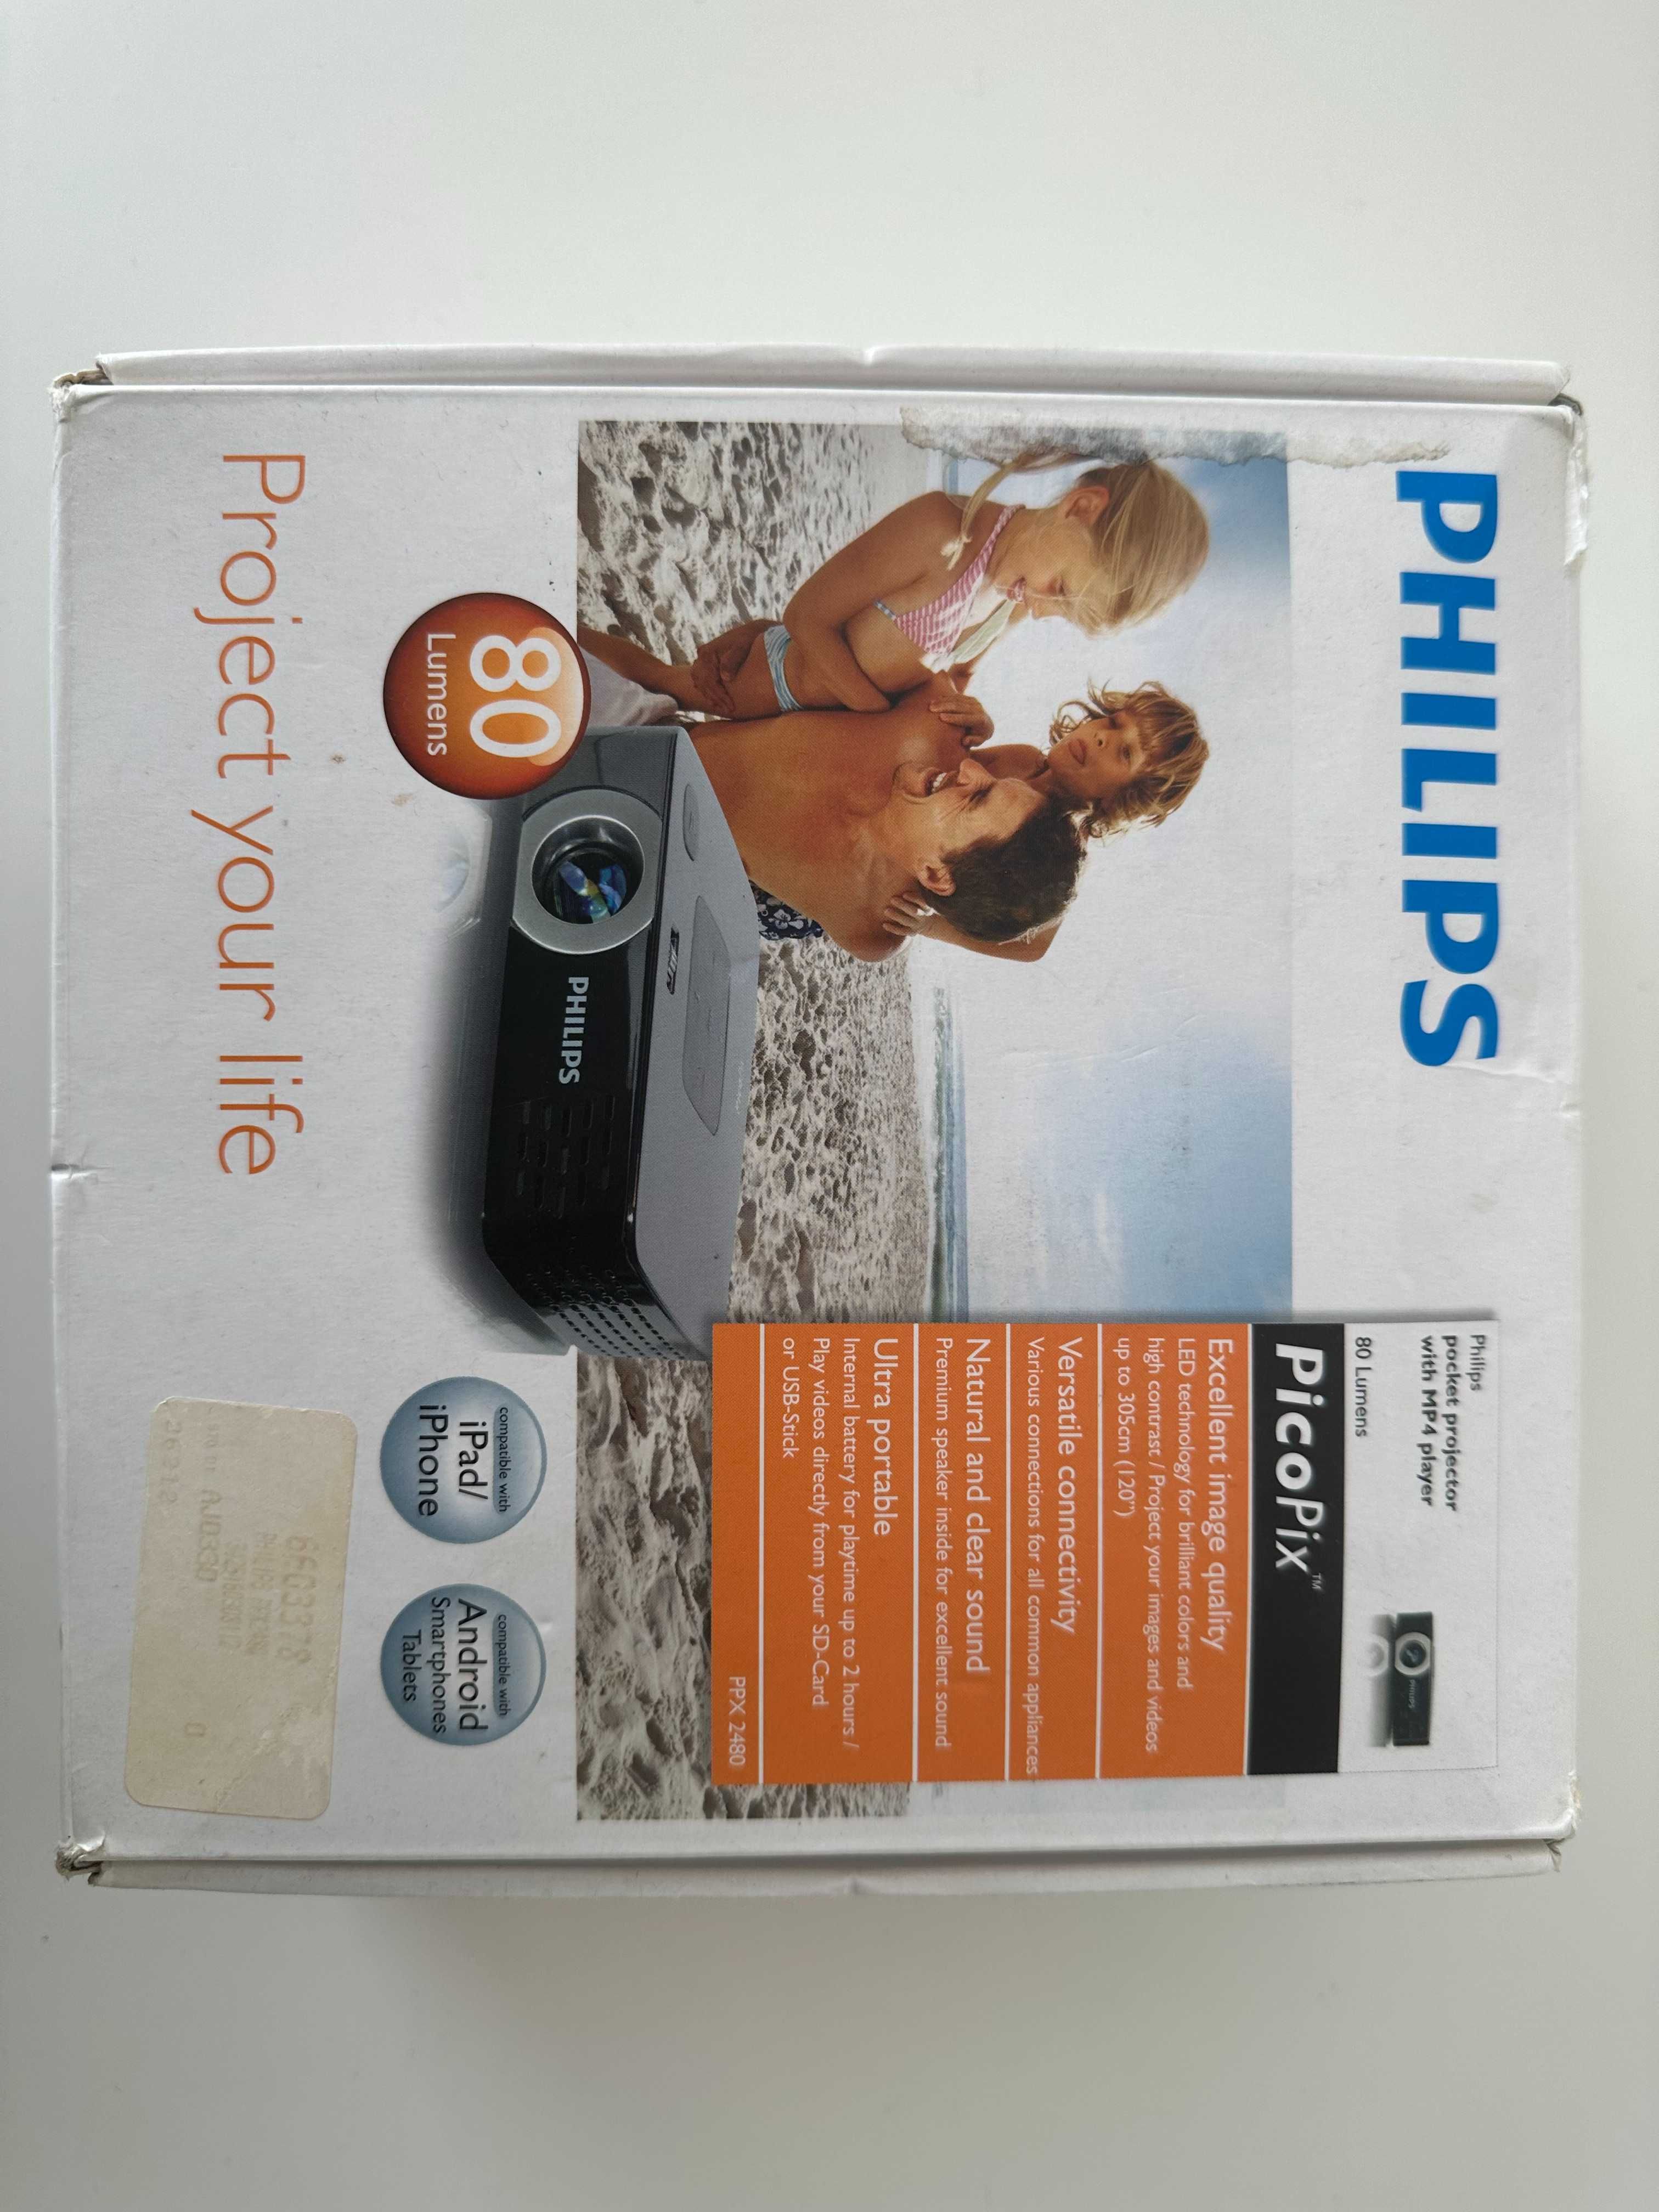 Philips Pocket Projector with mp4 player / Projector de bolso Philips